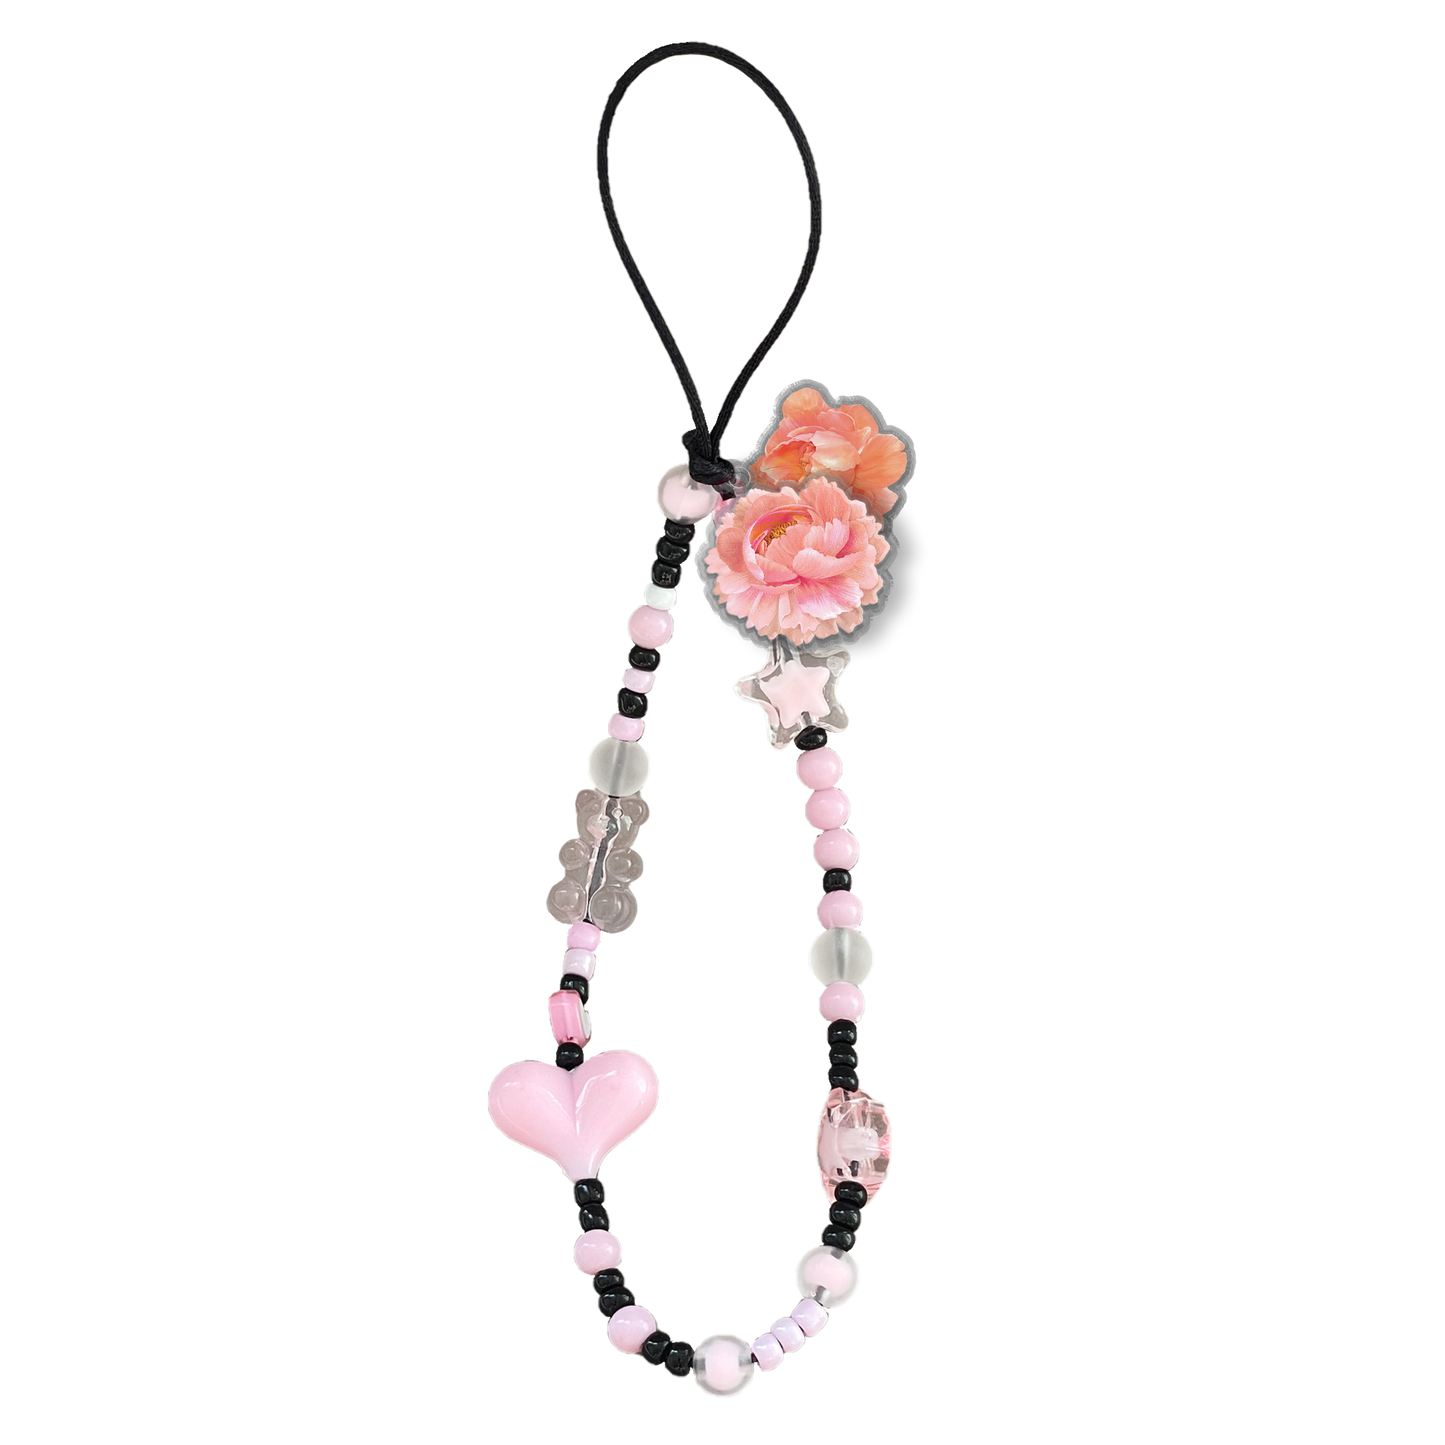 Beaded Strap with Acrylic Charm  - August Peony